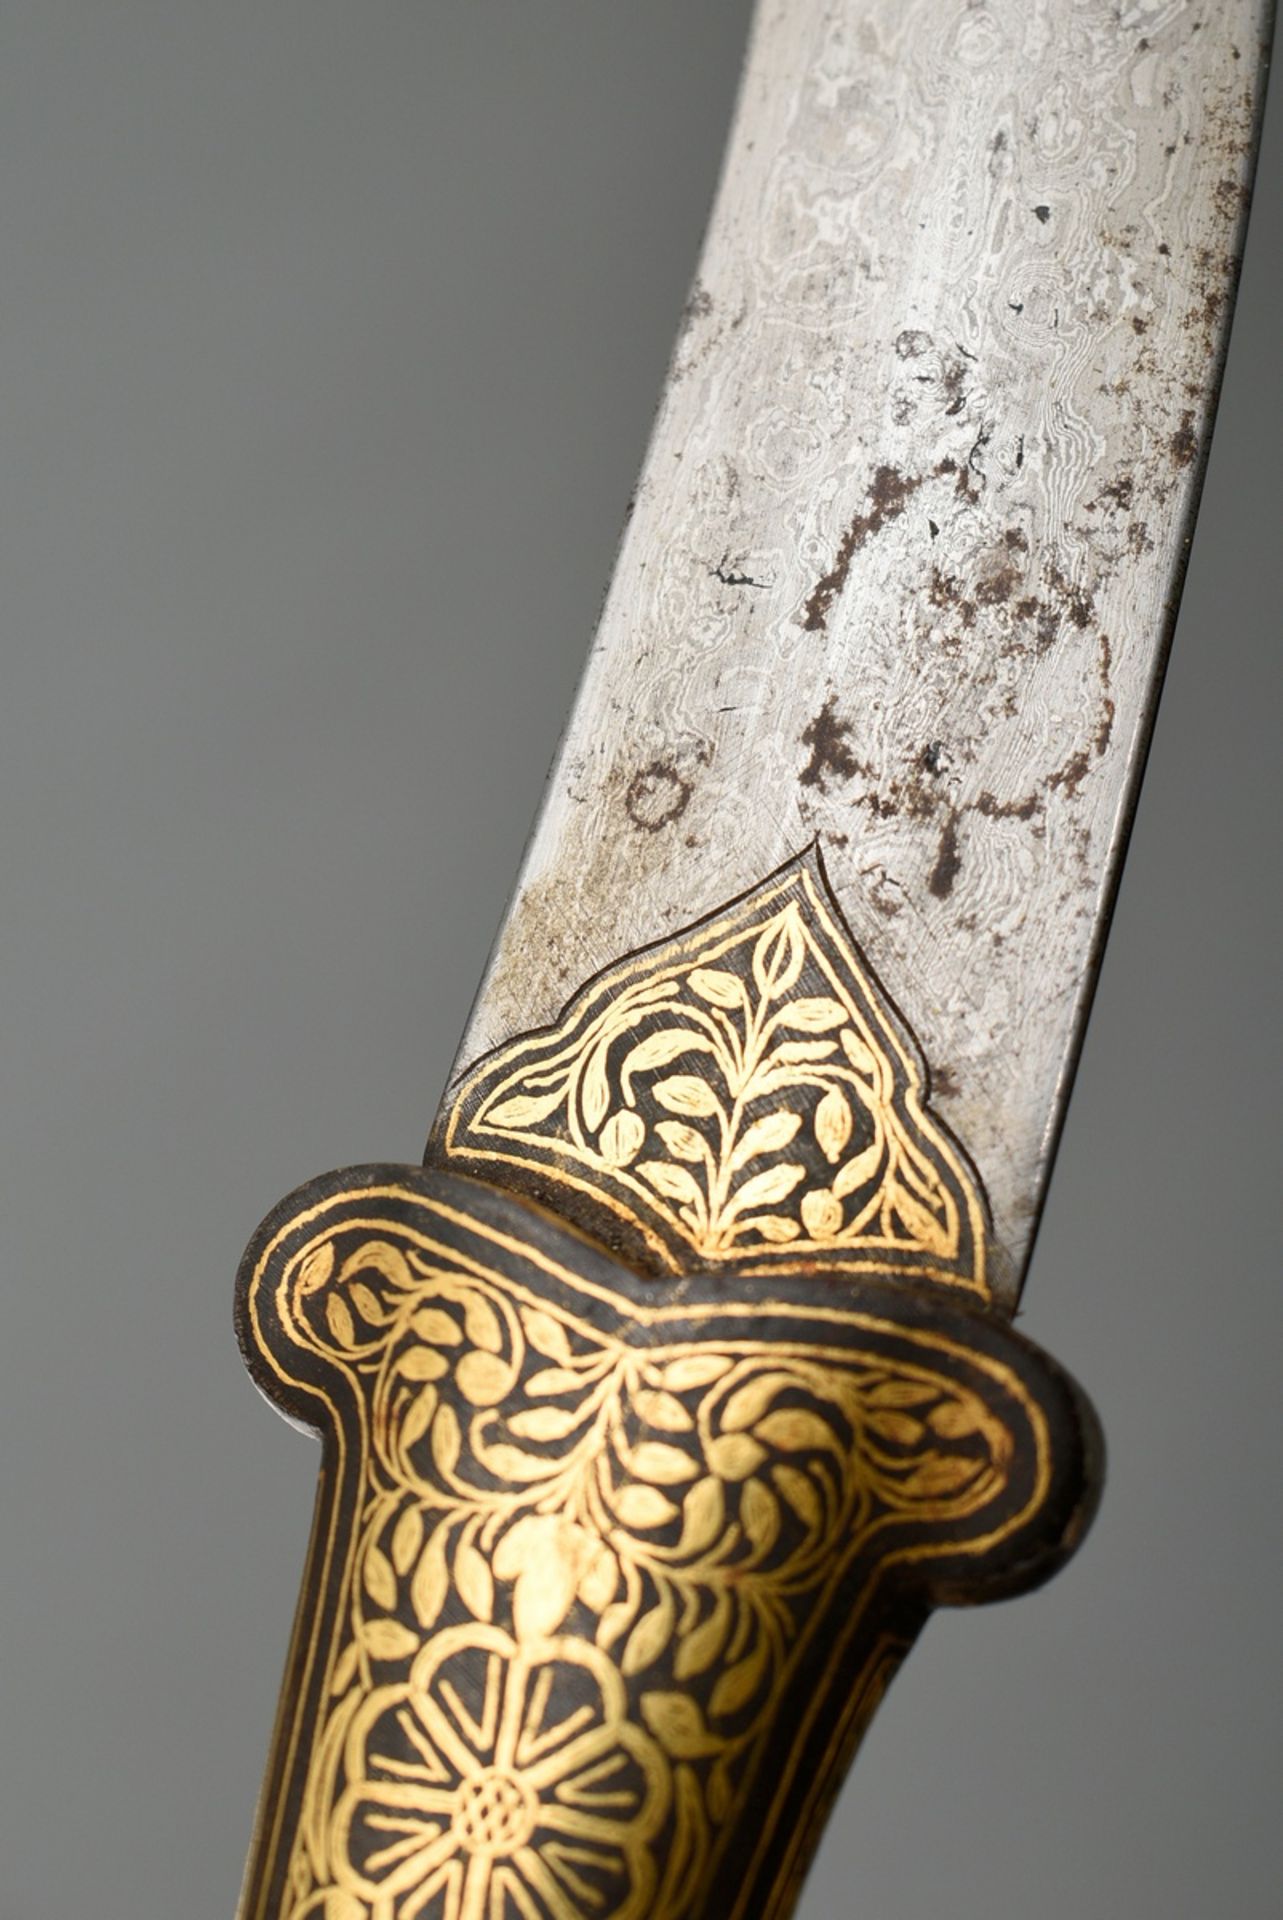 Indian "Khanjar" dagger with sculpted "sheep's head" handle end, inlaid with glass cabochons, handl - Image 5 of 5